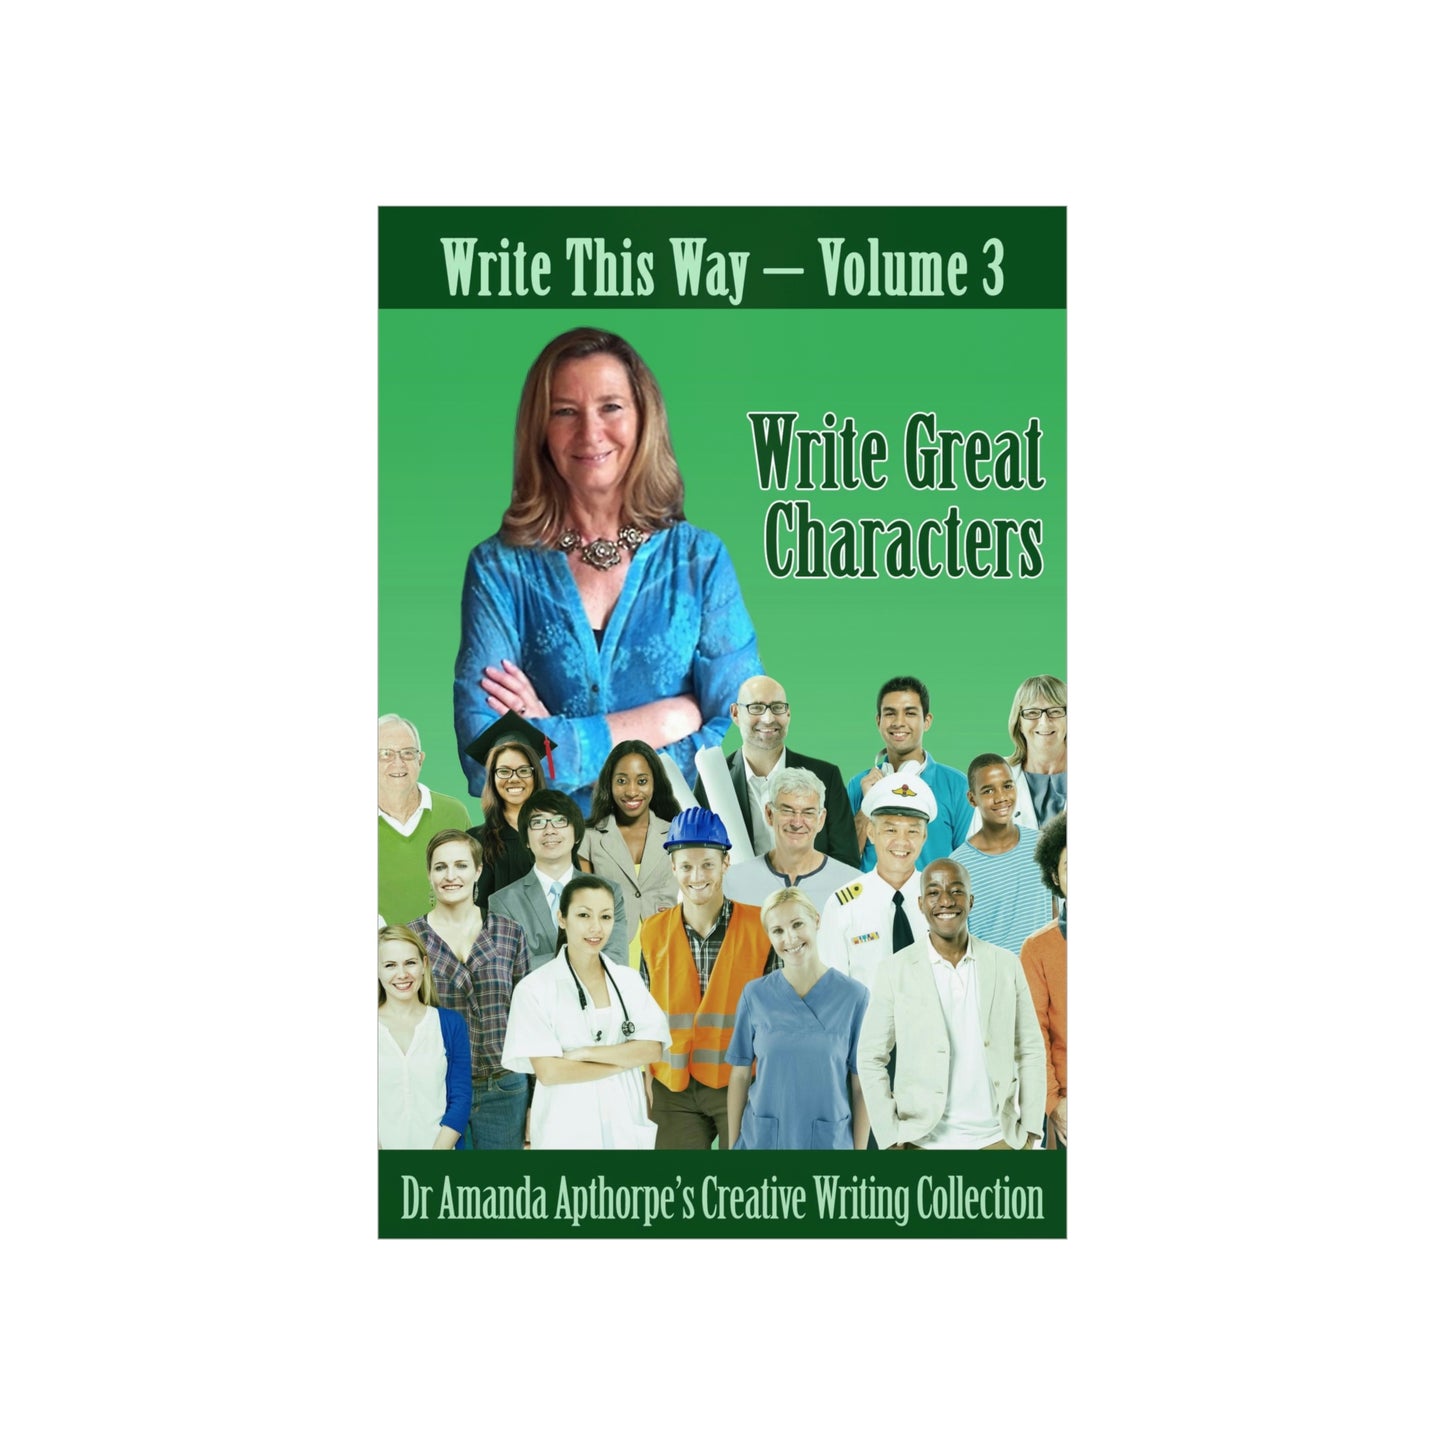 Write Great Characters - Matte Poster